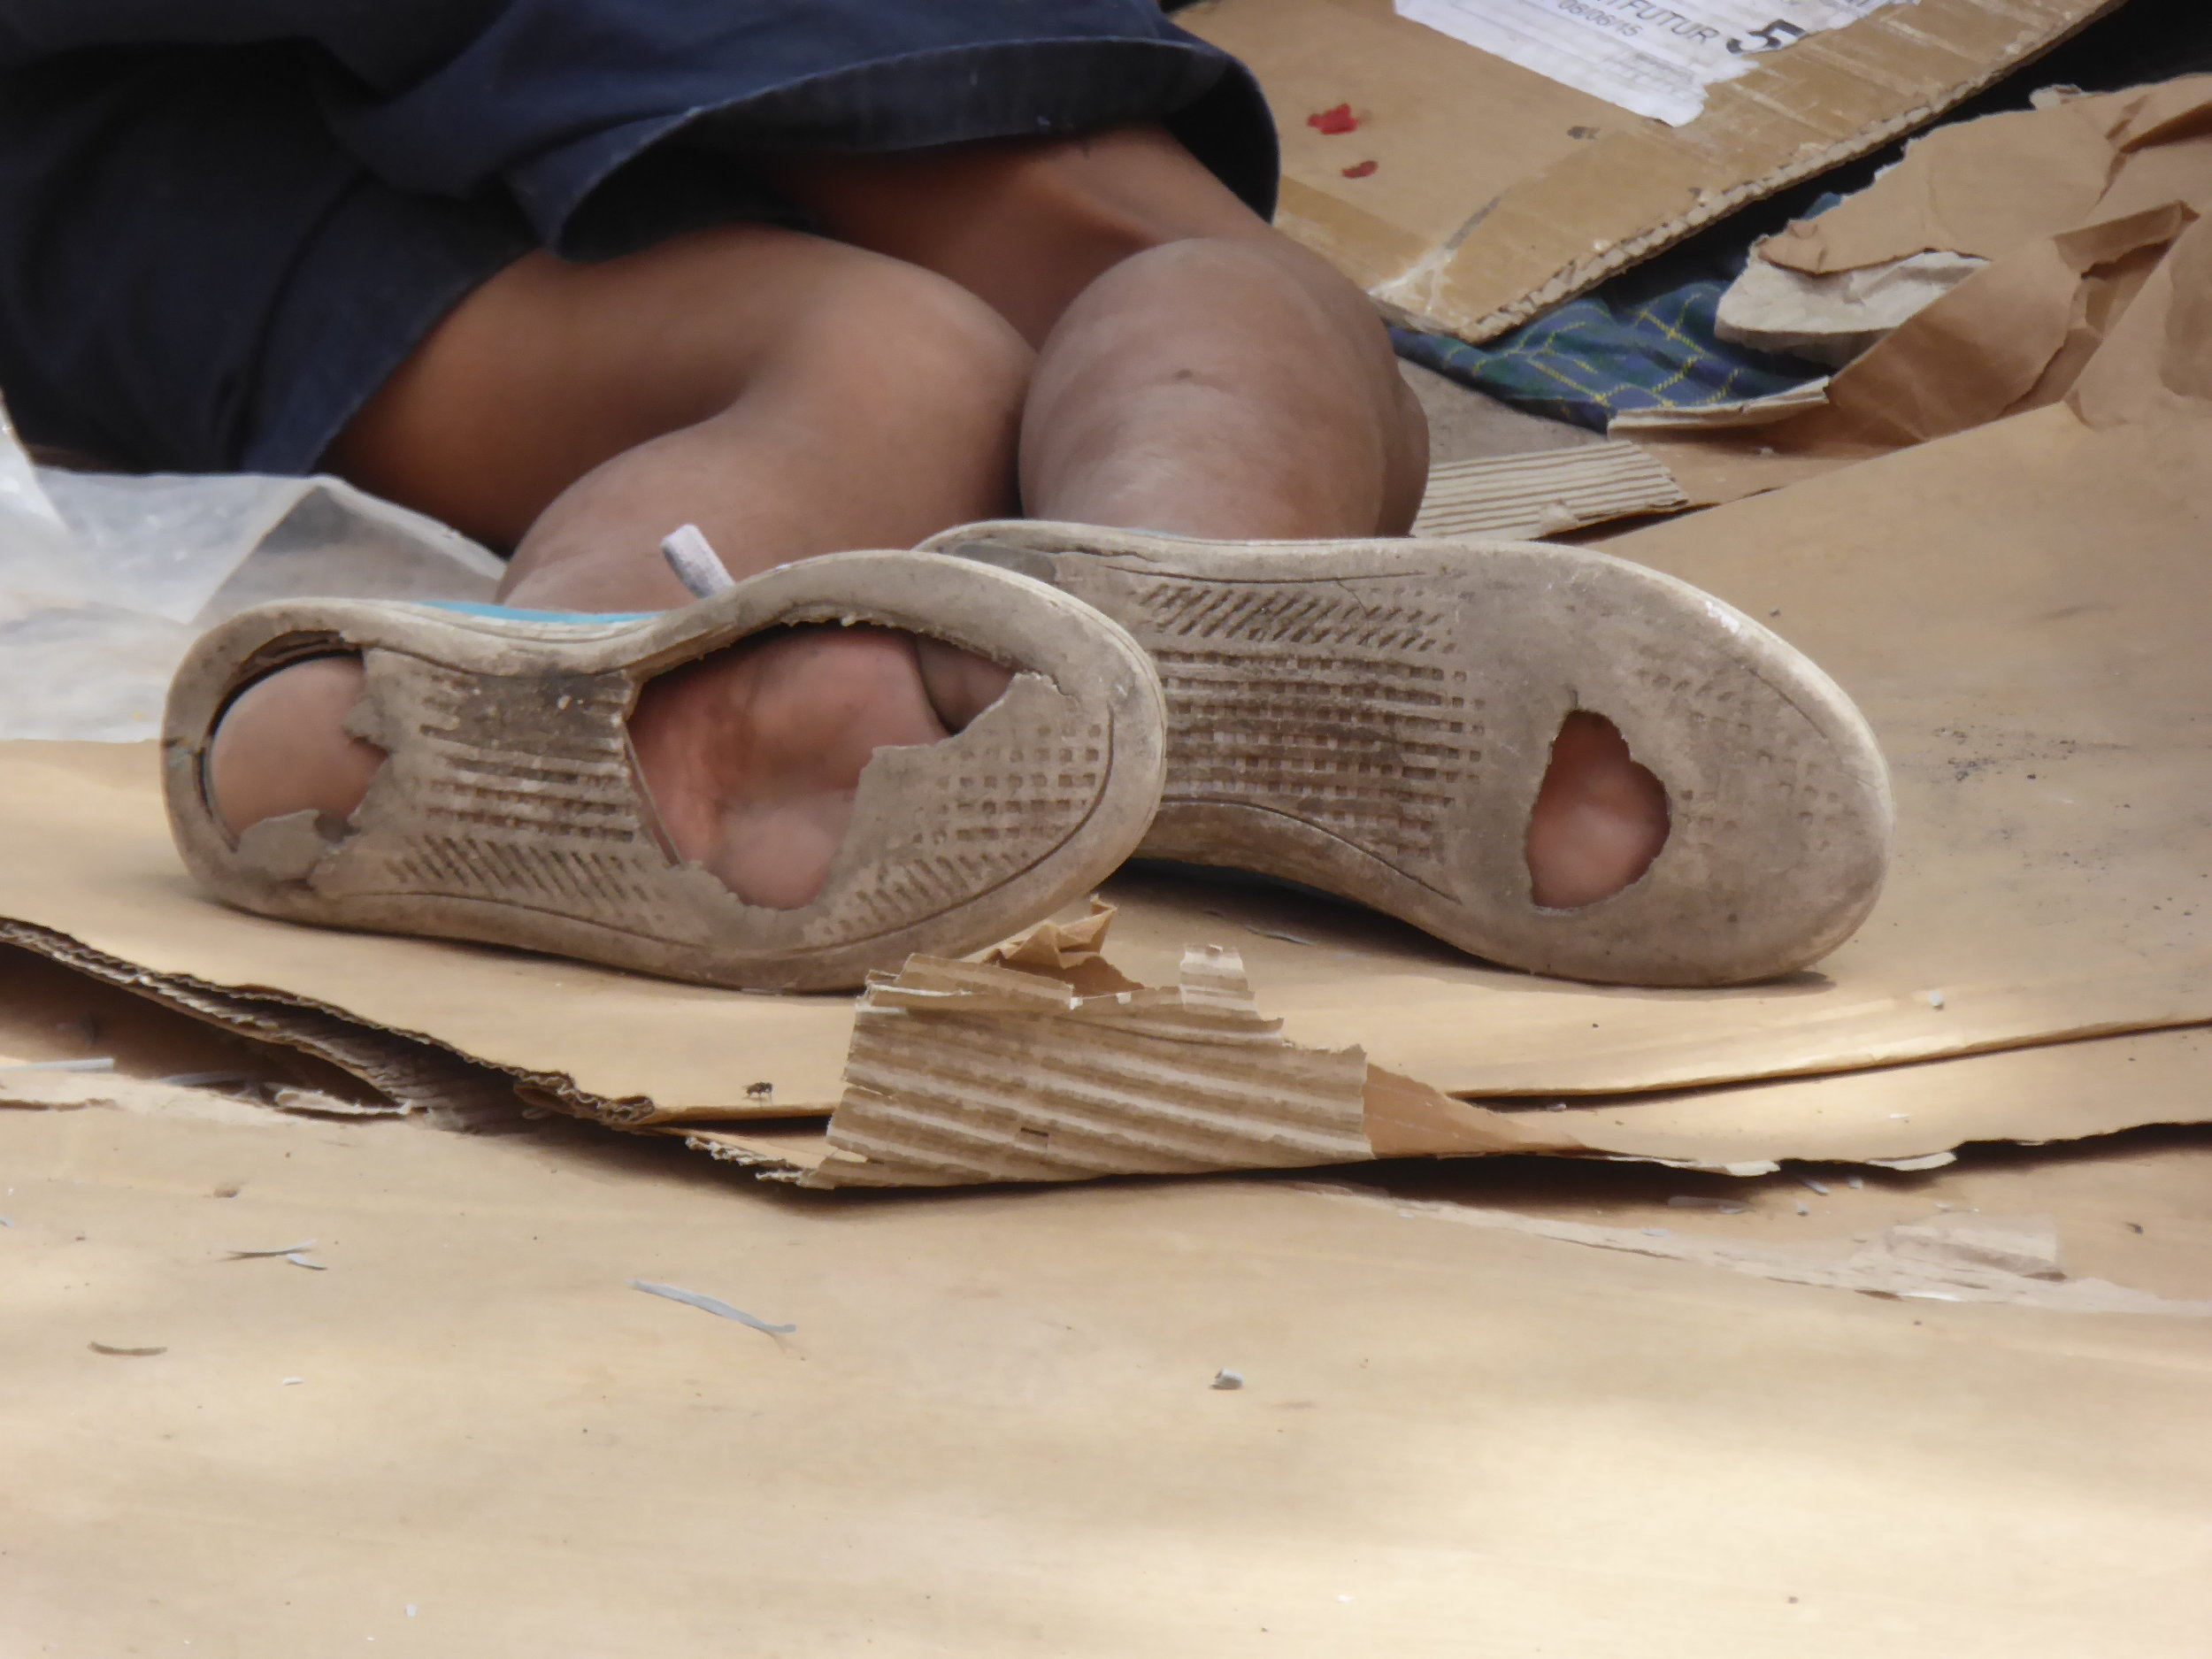  &nbsp;These are the feet and shoes of a homeless boy in Tegucigalpa, Honduras.&nbsp;We are supporting the recruitment of vulnerable boys and girls into Covvenant House (Casa Alianza) before they are forced into gangs or are trafficked. 